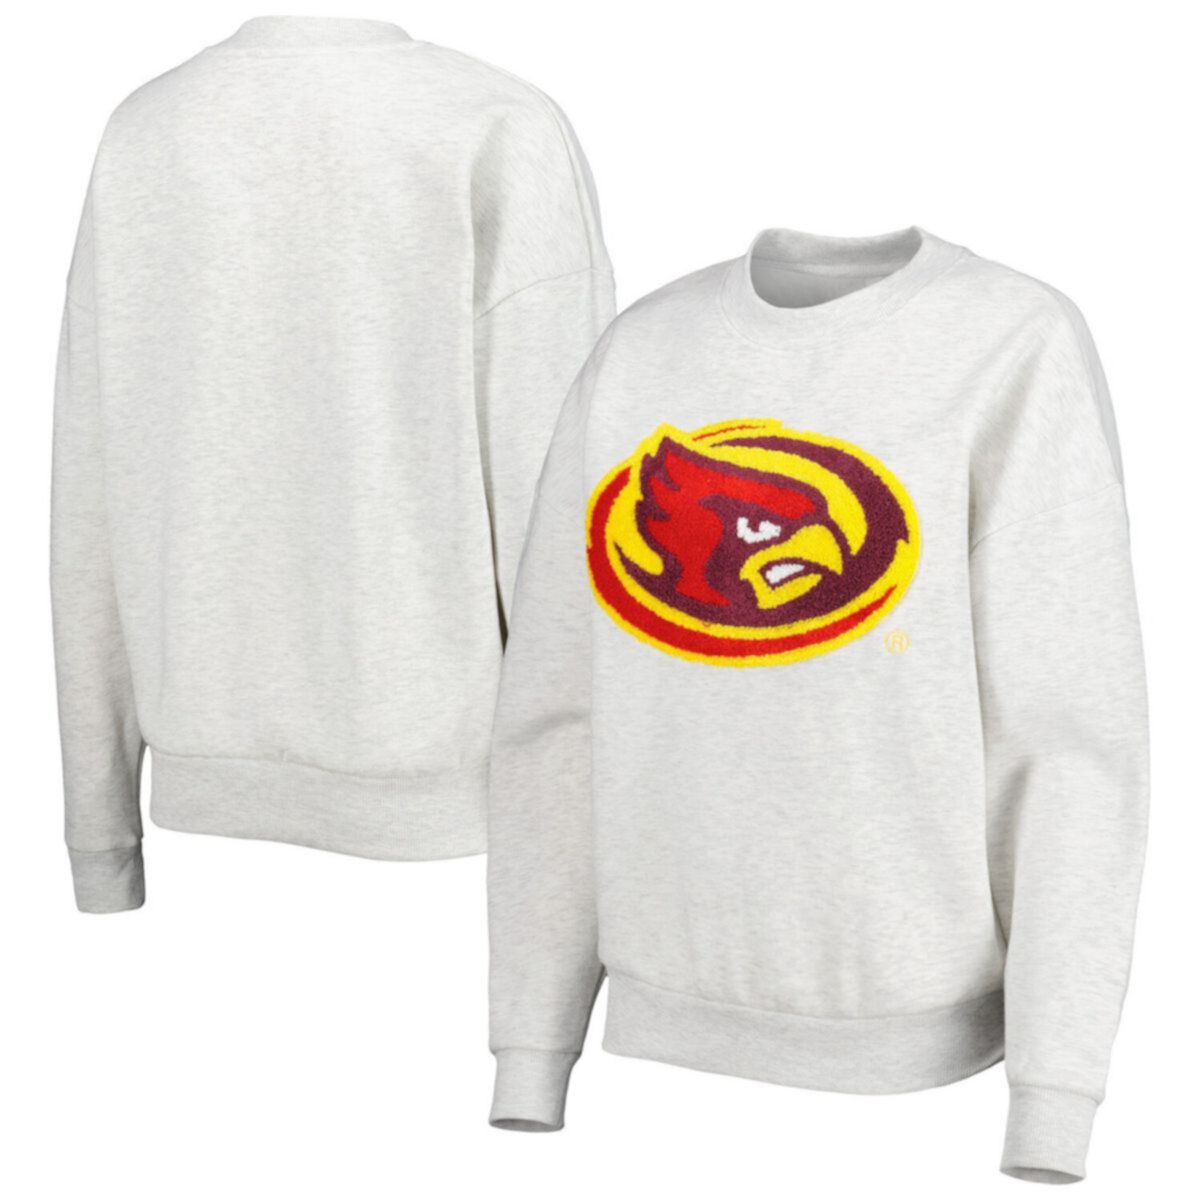 Women's Gameday Couture Heather Gray Iowa State Cyclones Chenille Patch Fleece Pullover Sweatshirt Gameday Couture